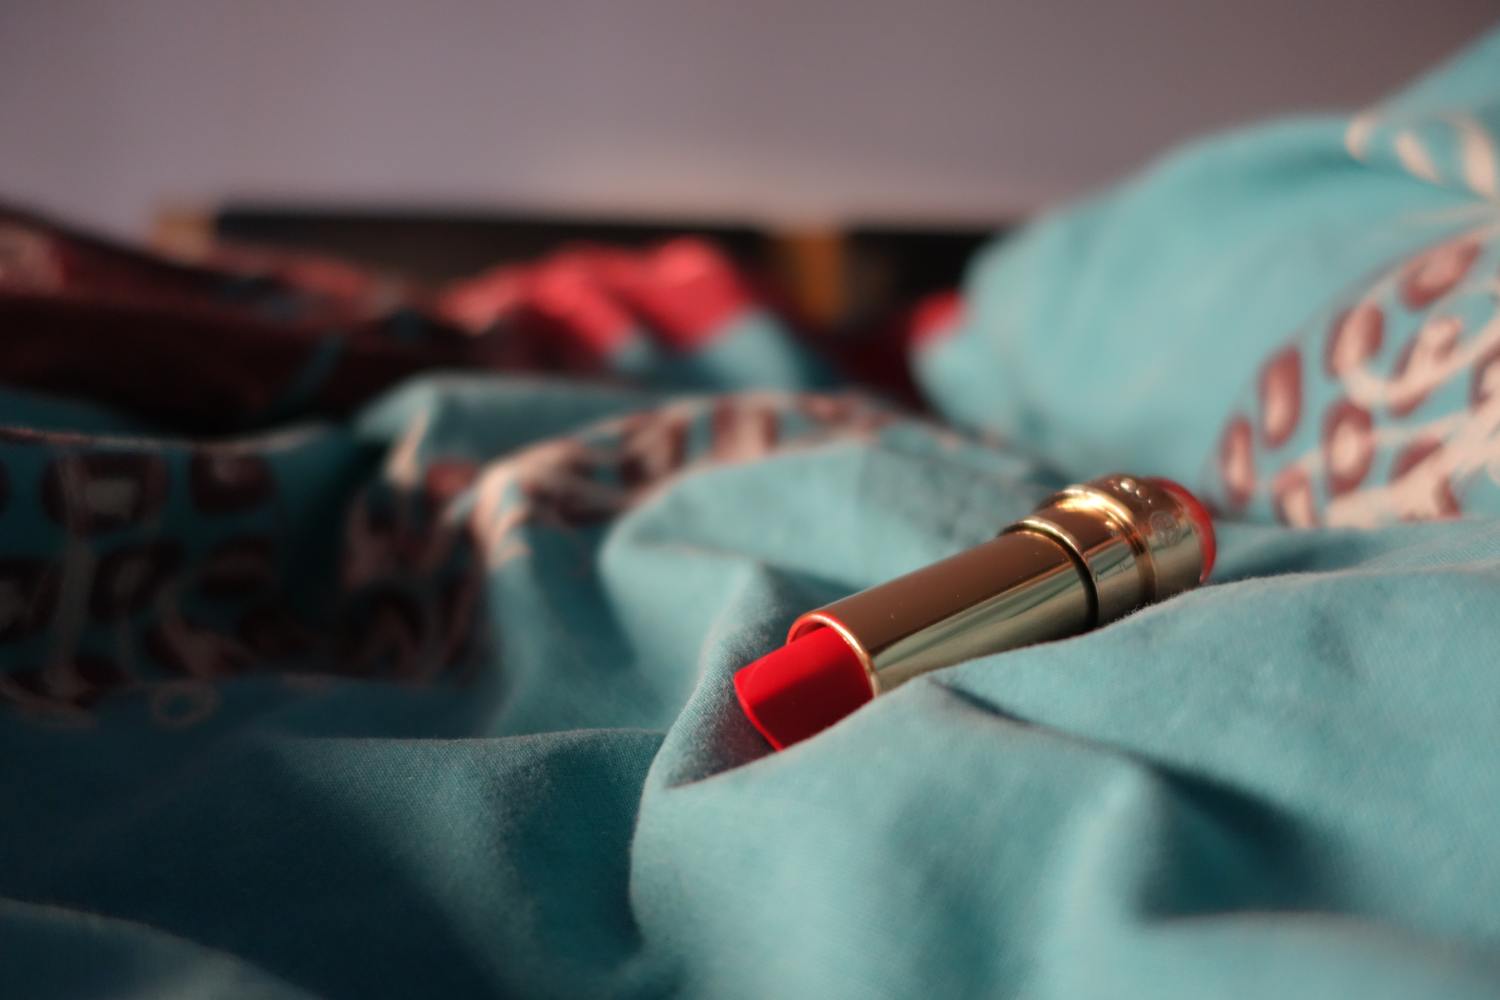 how to remove lipstick from fabric